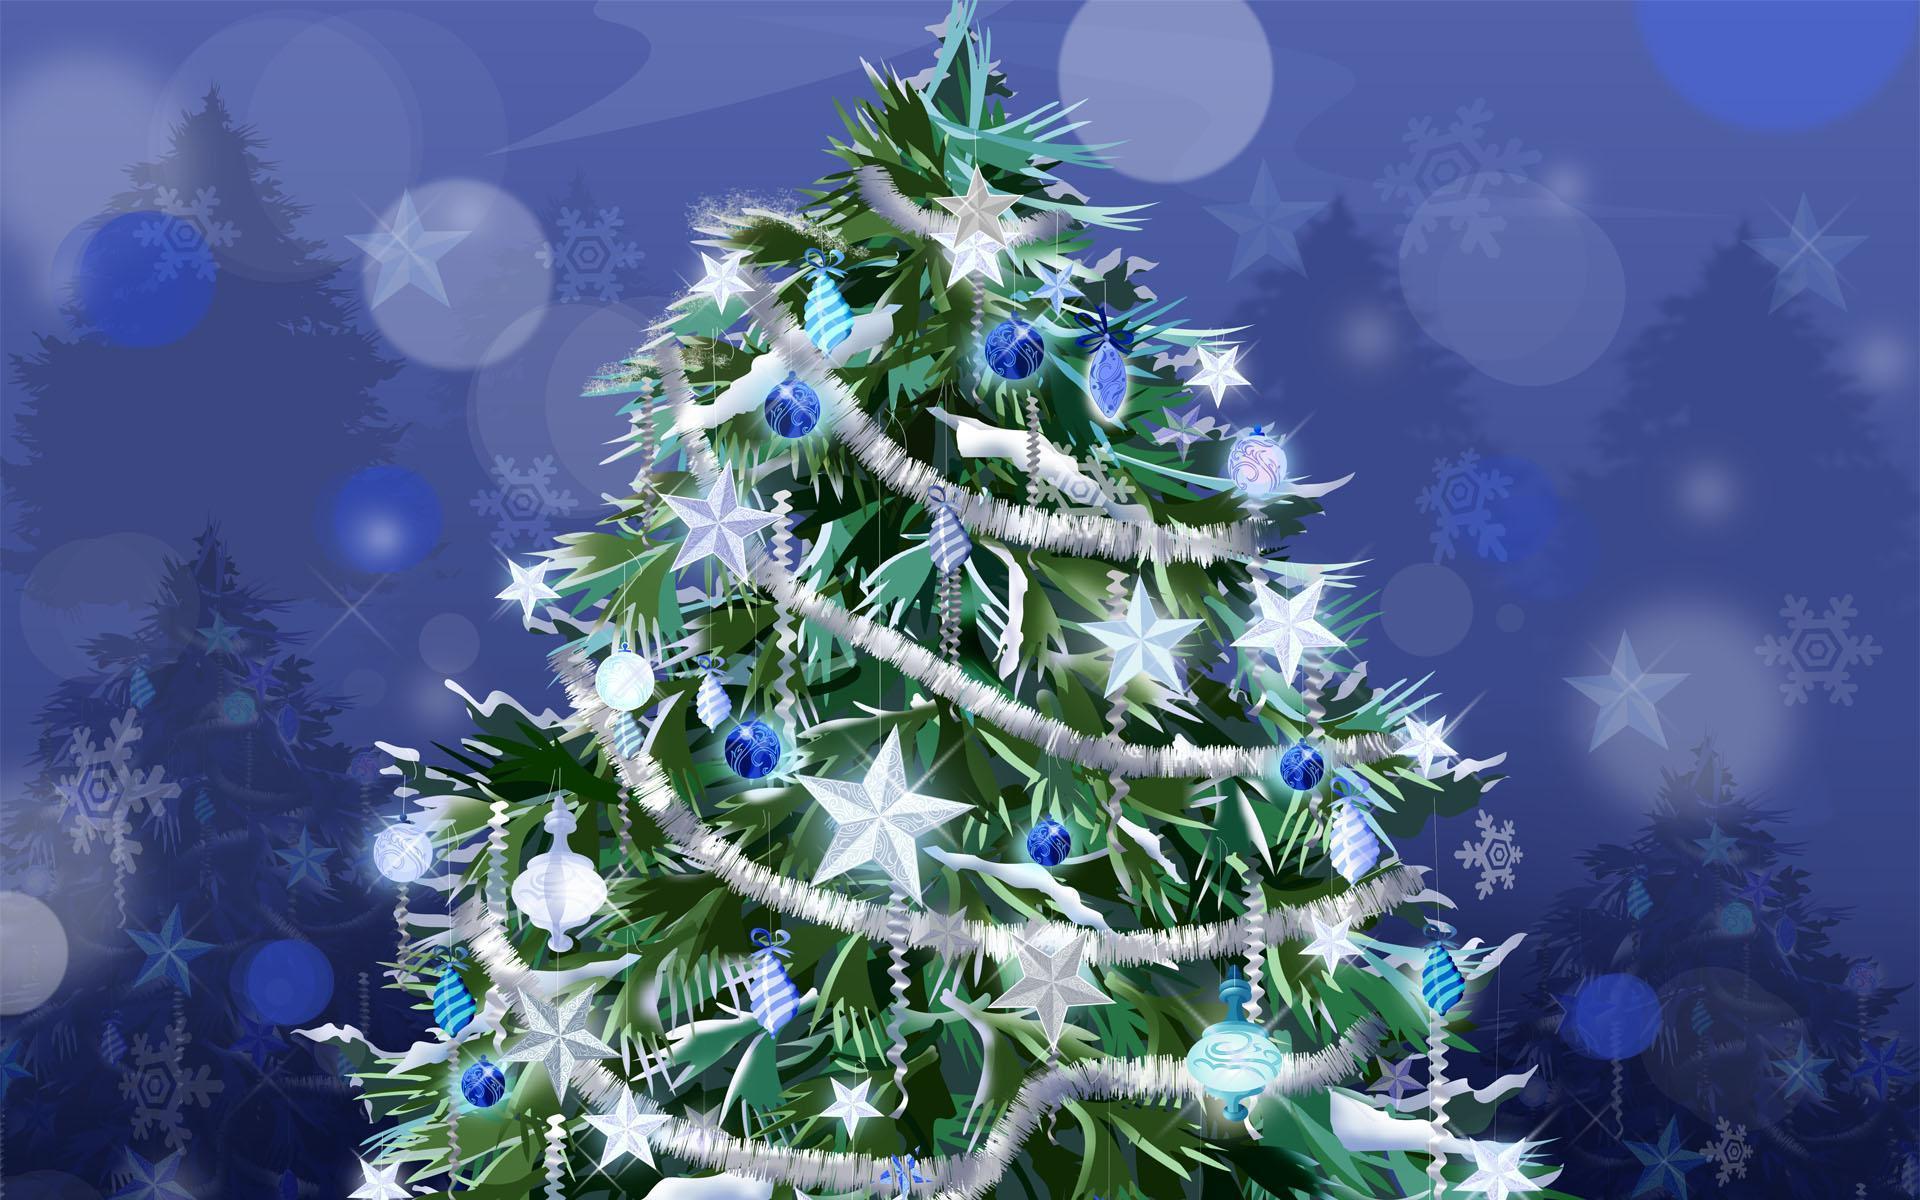 New year wallpaper holiday tree free desktop background